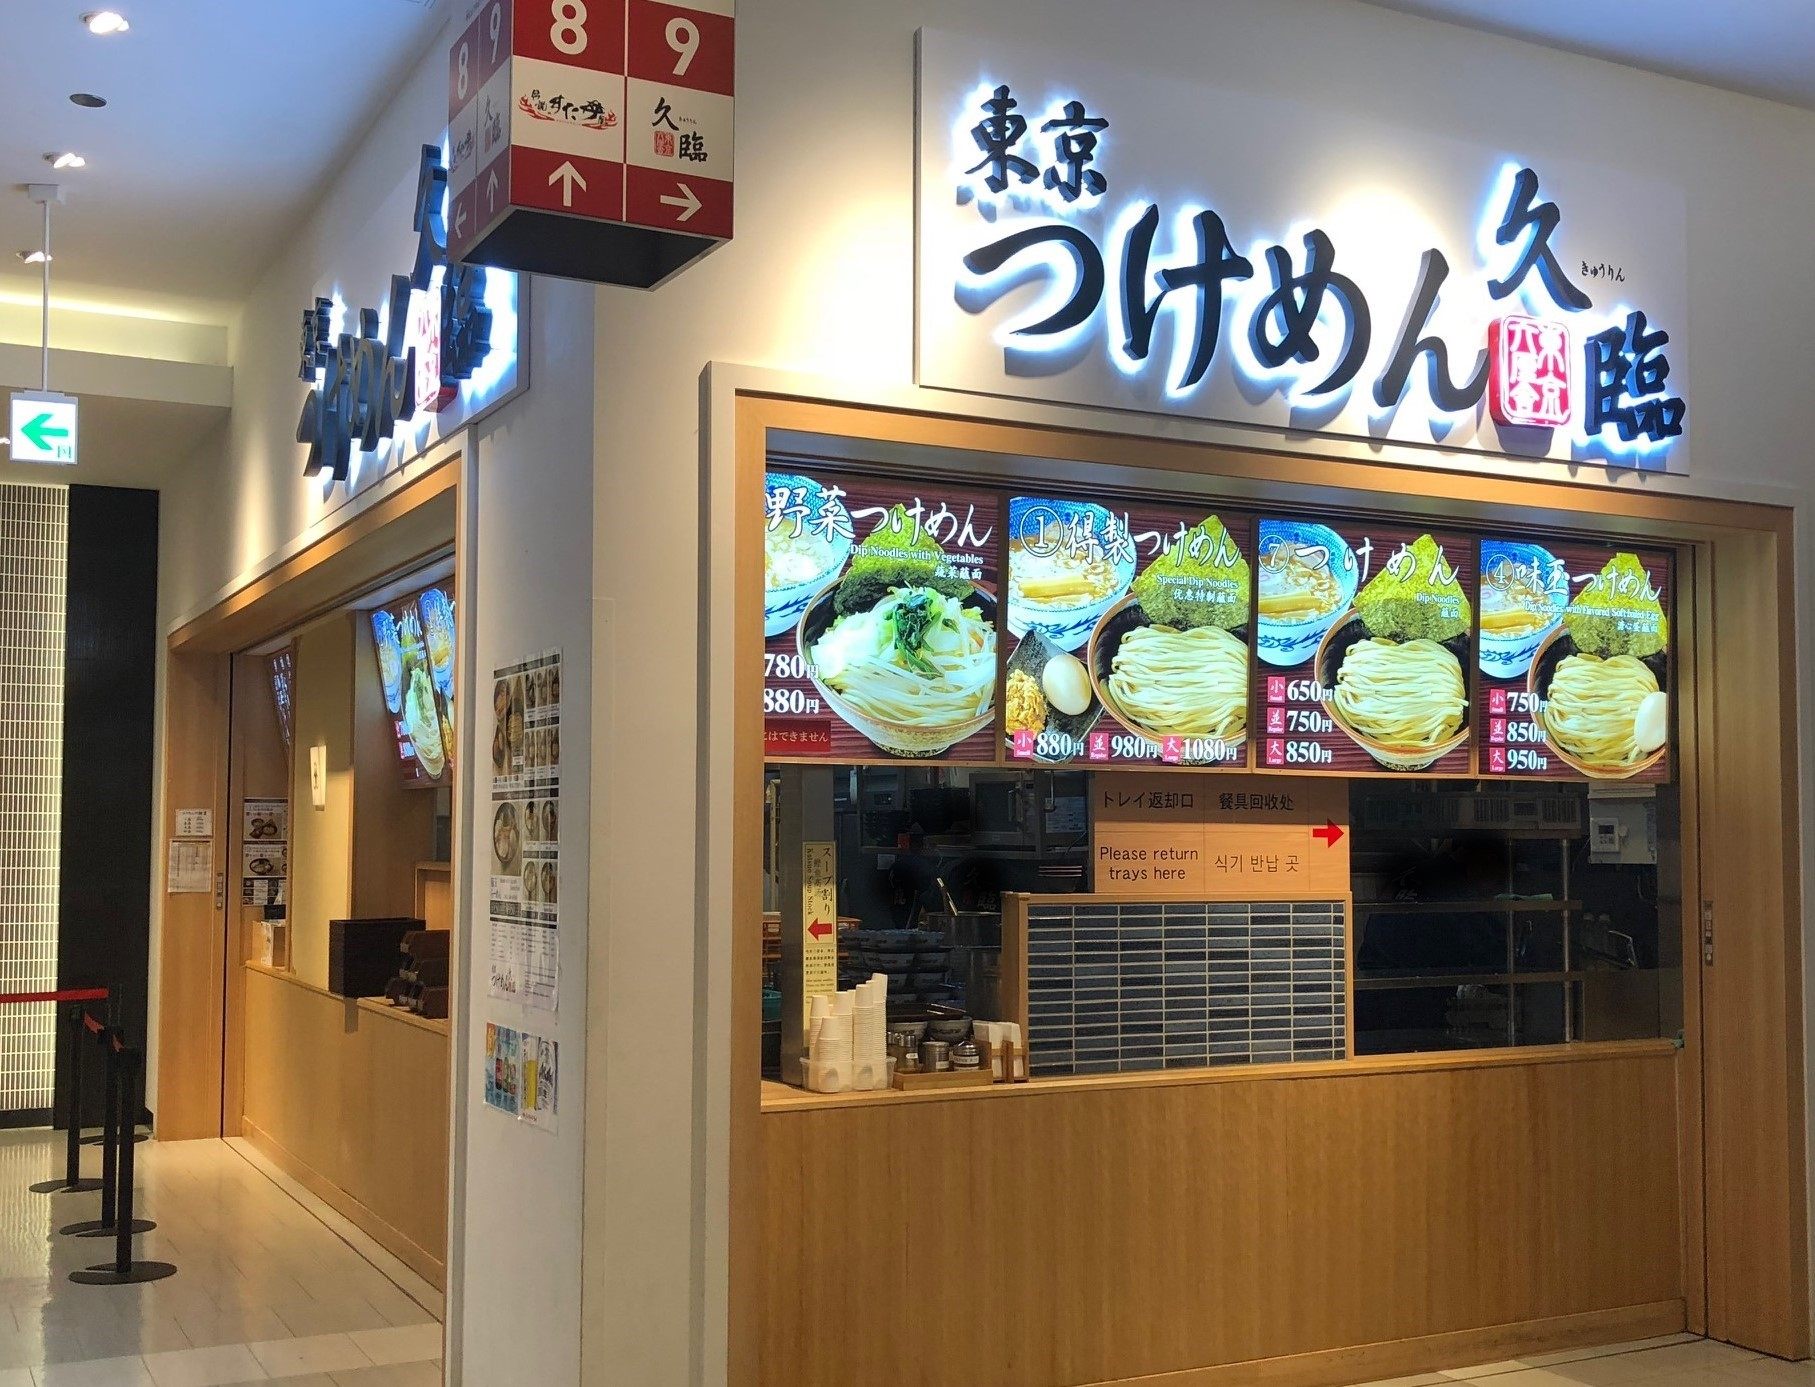 Tokyo Tsukemen Kyurin Diver City Tokyo Plaza Store What To Eat Access Hours Price Good Luck Trip